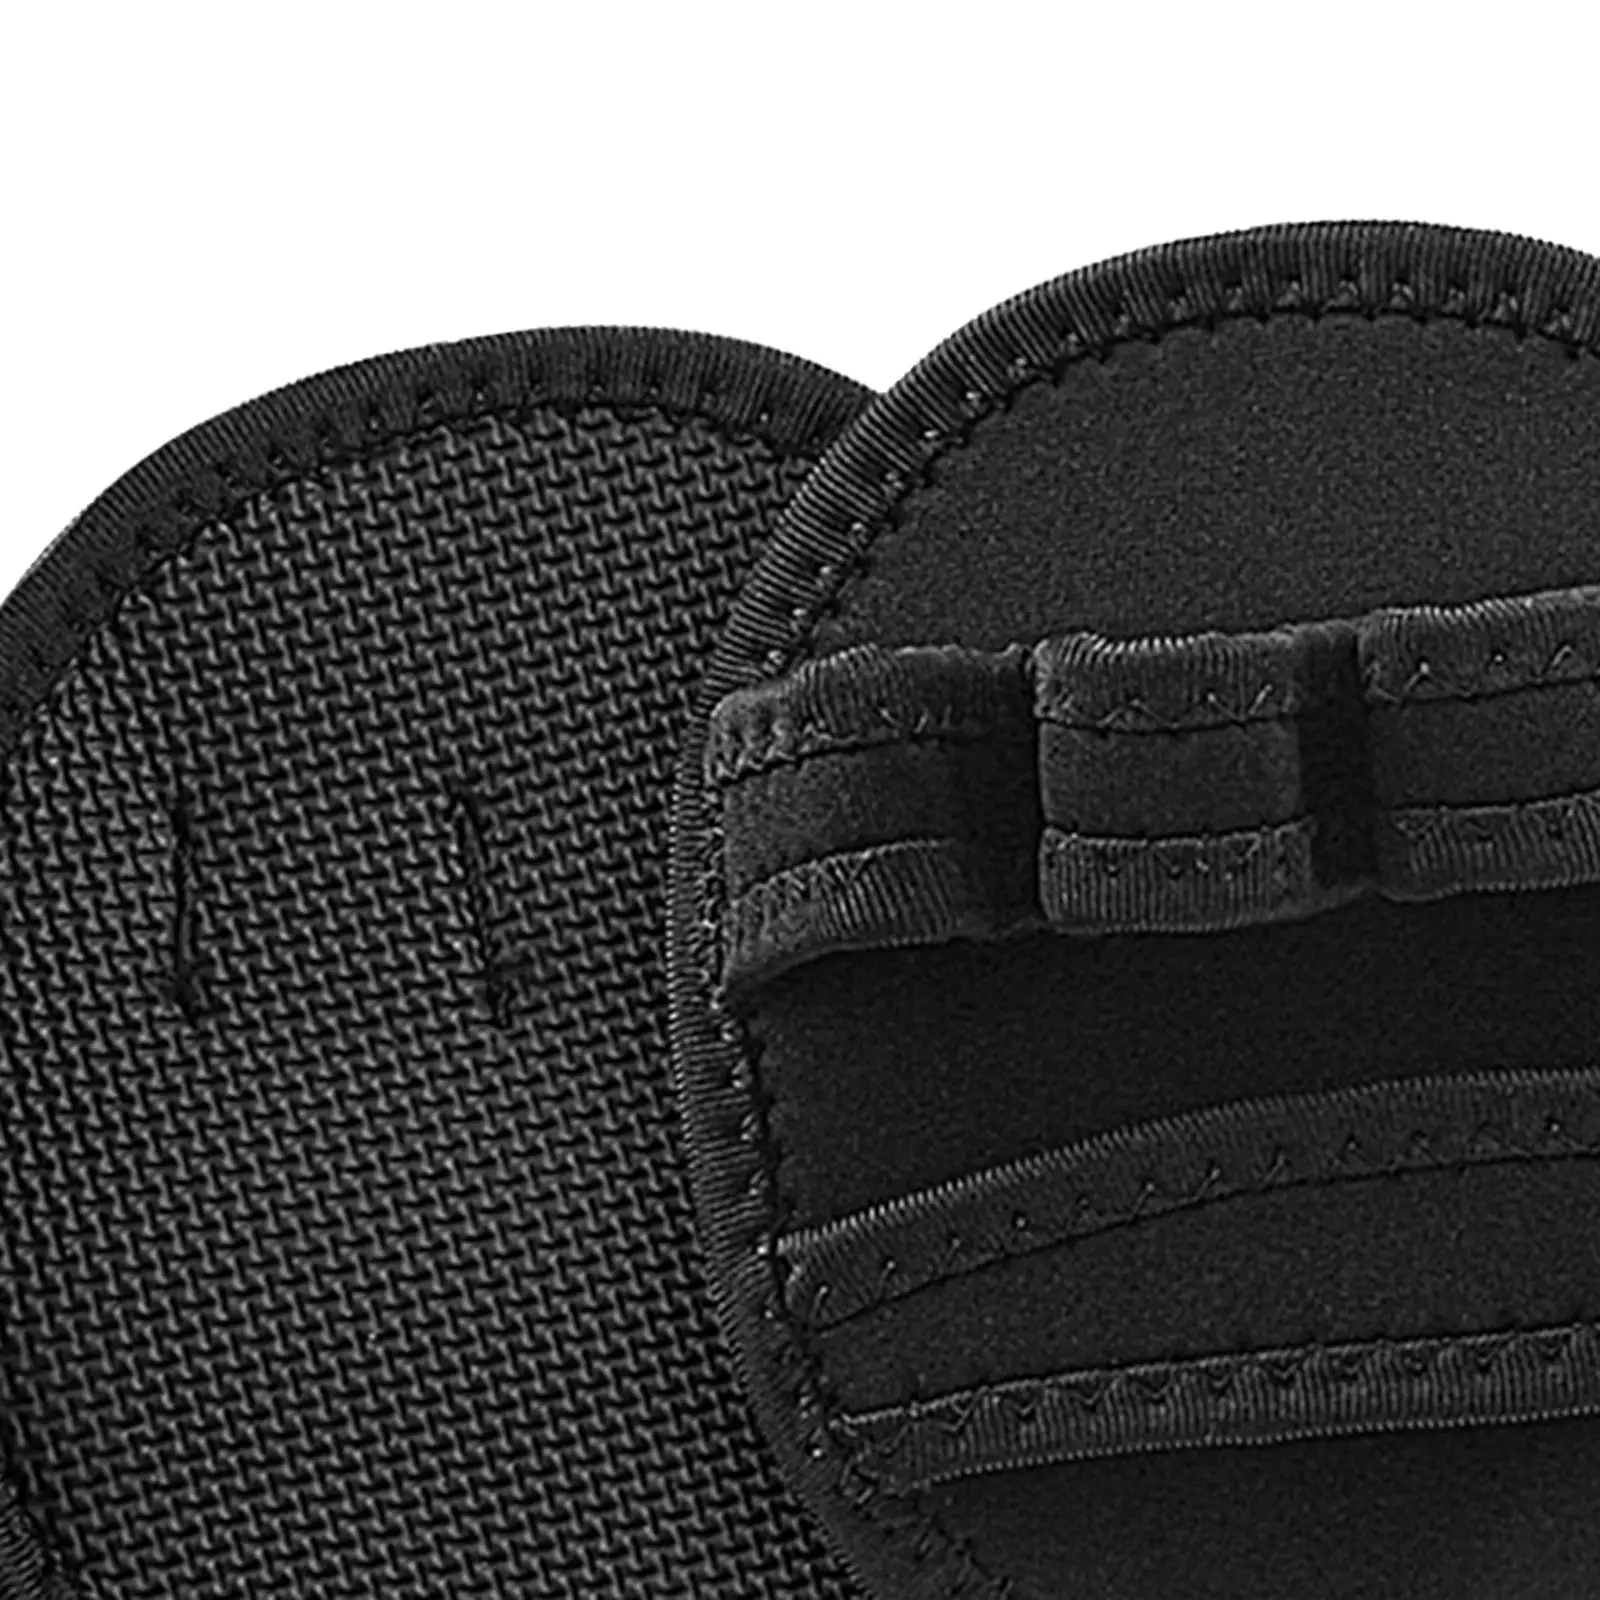 Weight Lifting Grip Pads for Men Unisex Grip Pads for Sports